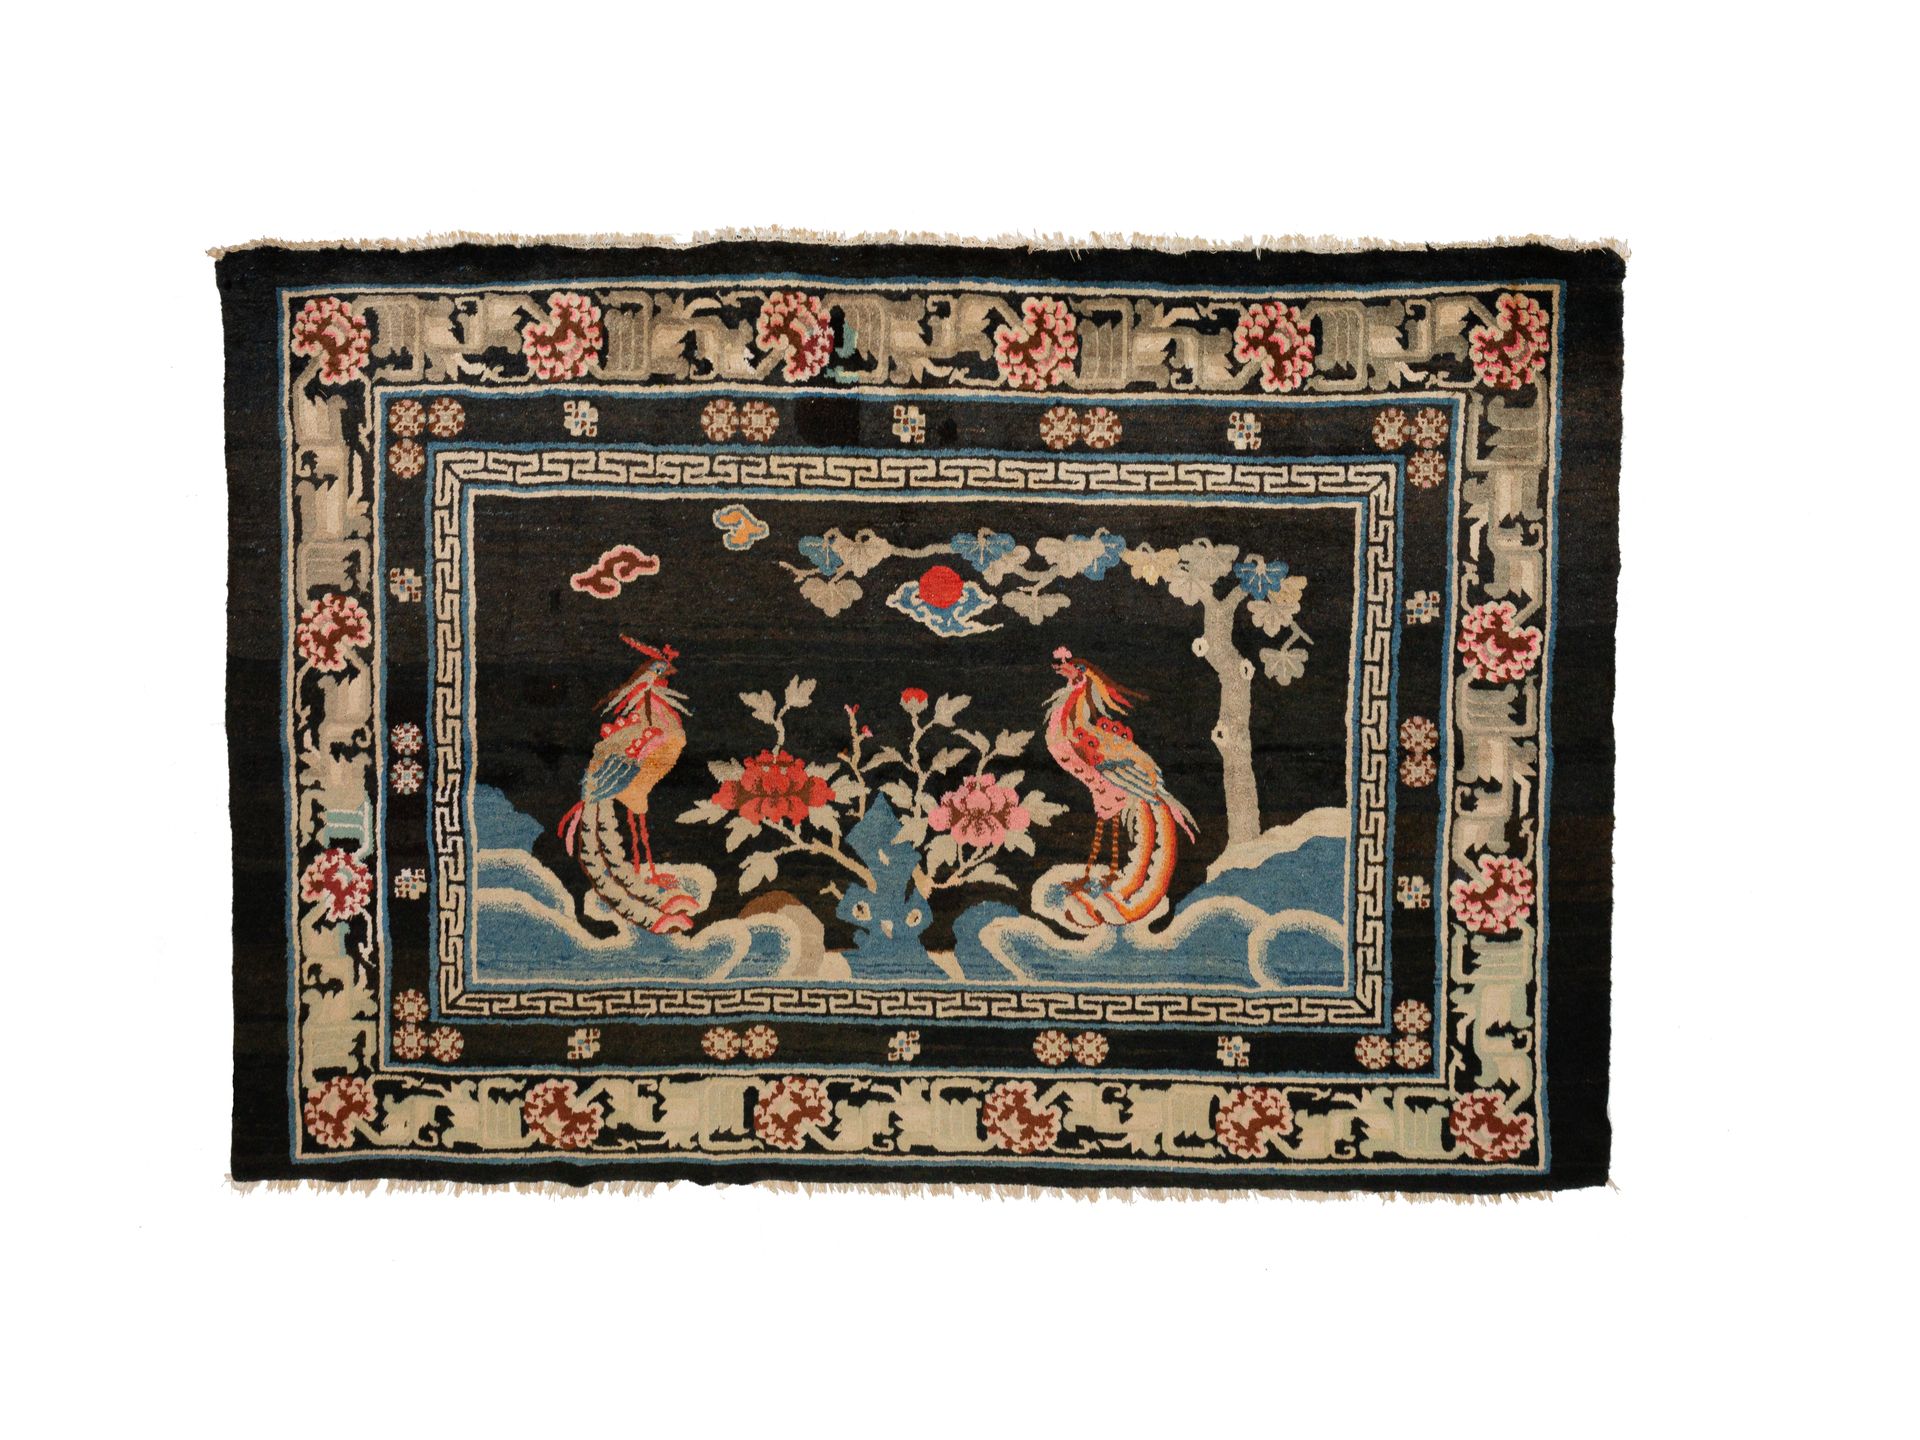 Null Original China Bao Tao carpet, end of 19th and beginning of 20th century

O&hellip;